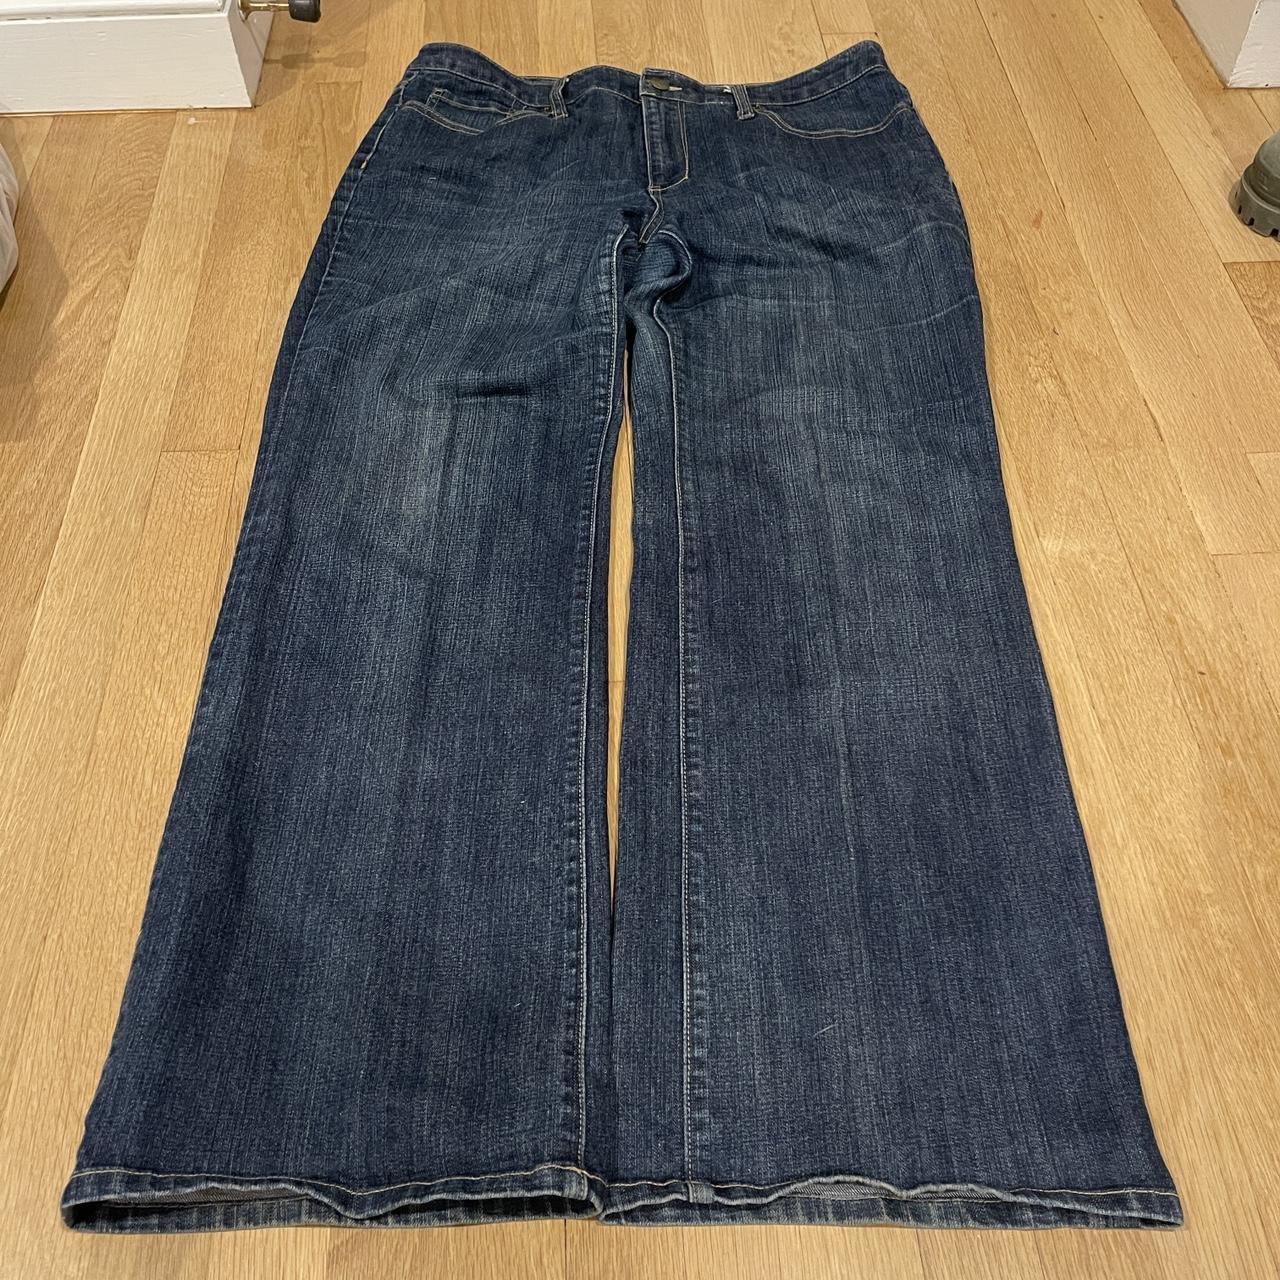 Seven7 Flares Very wide jeans that are beautiful on... - Depop